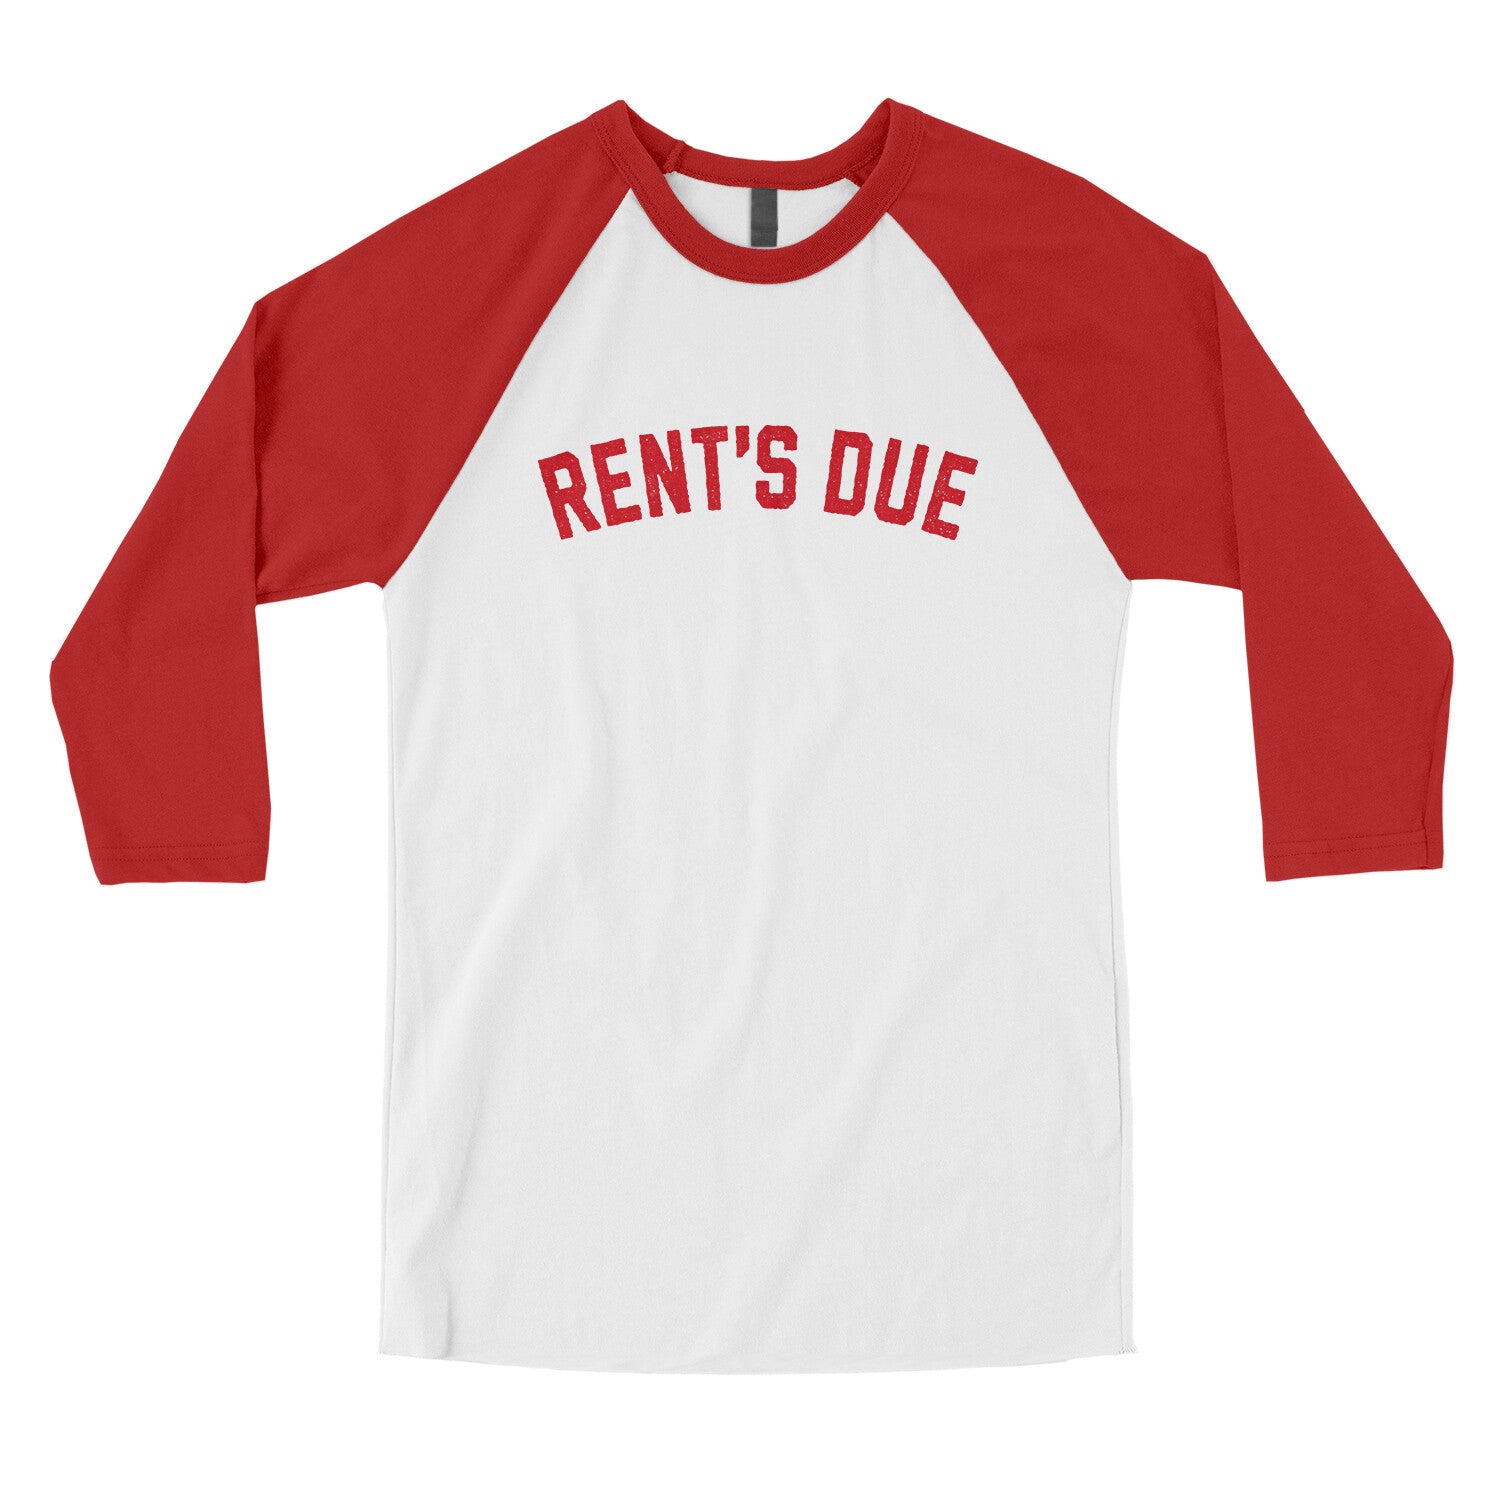 Rent's Due in White with Red Color